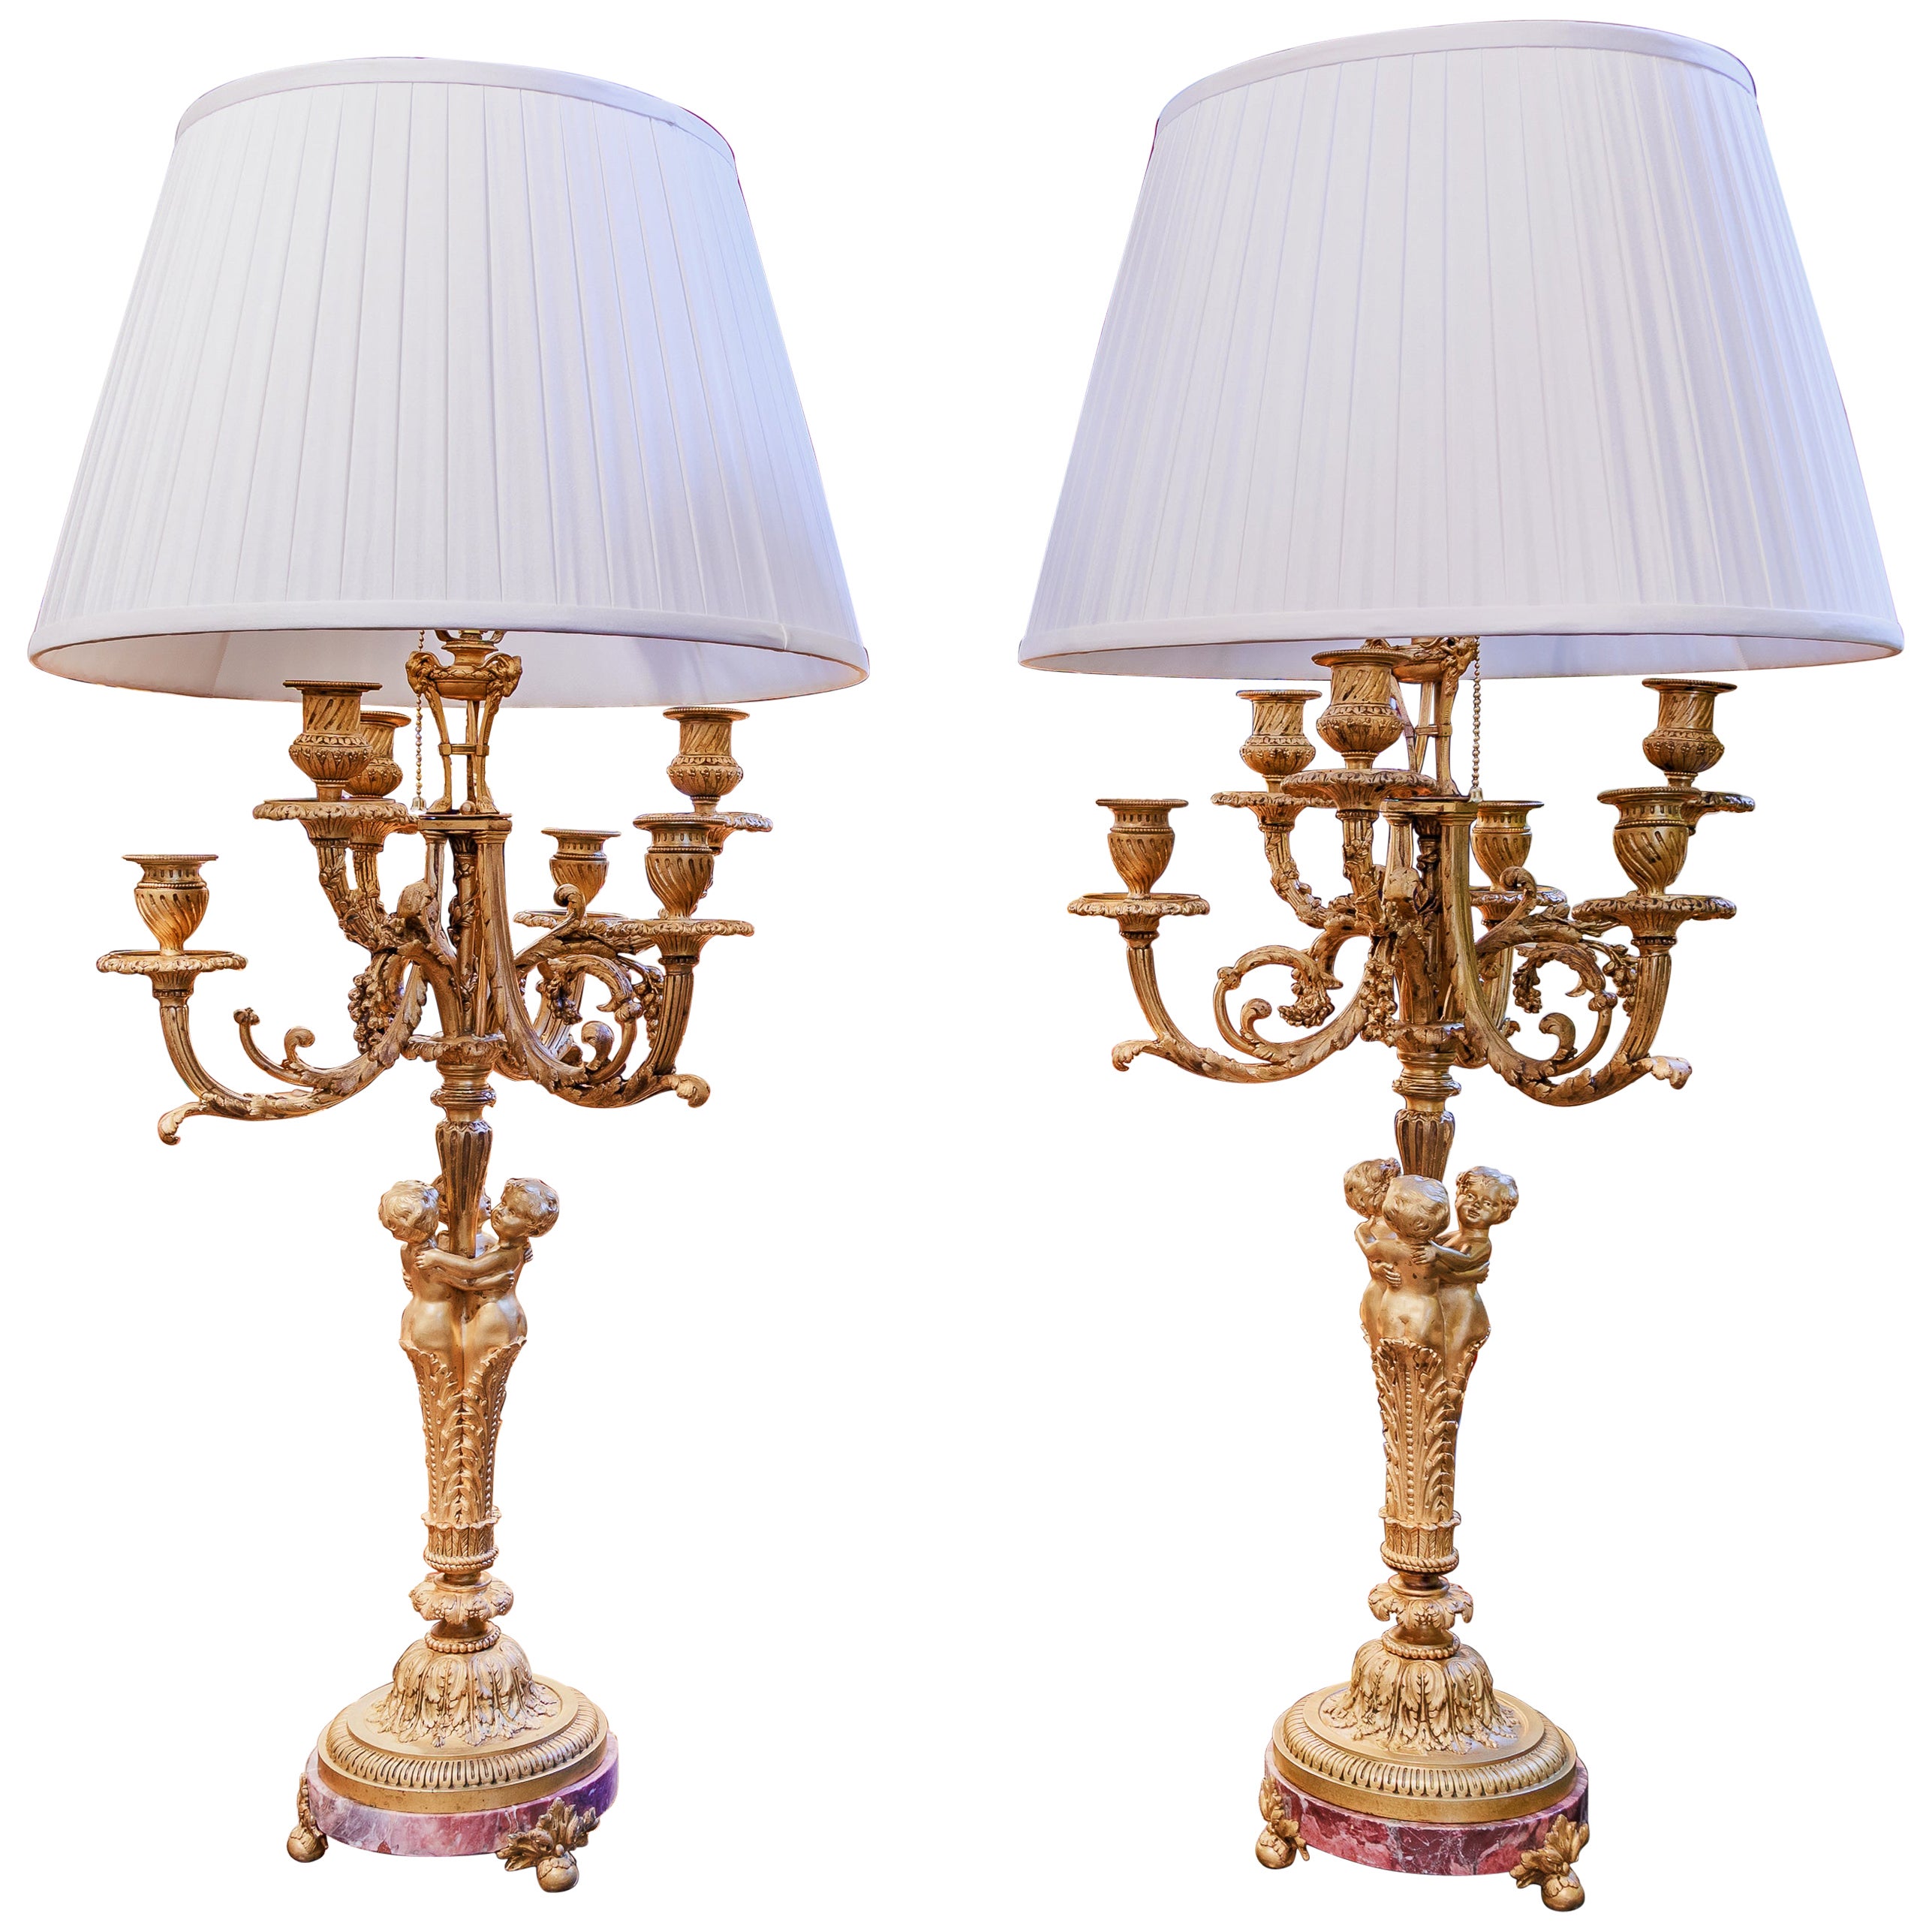 A fine pair of French Louis Philippe gilt bronze cherub candlabrum lamps